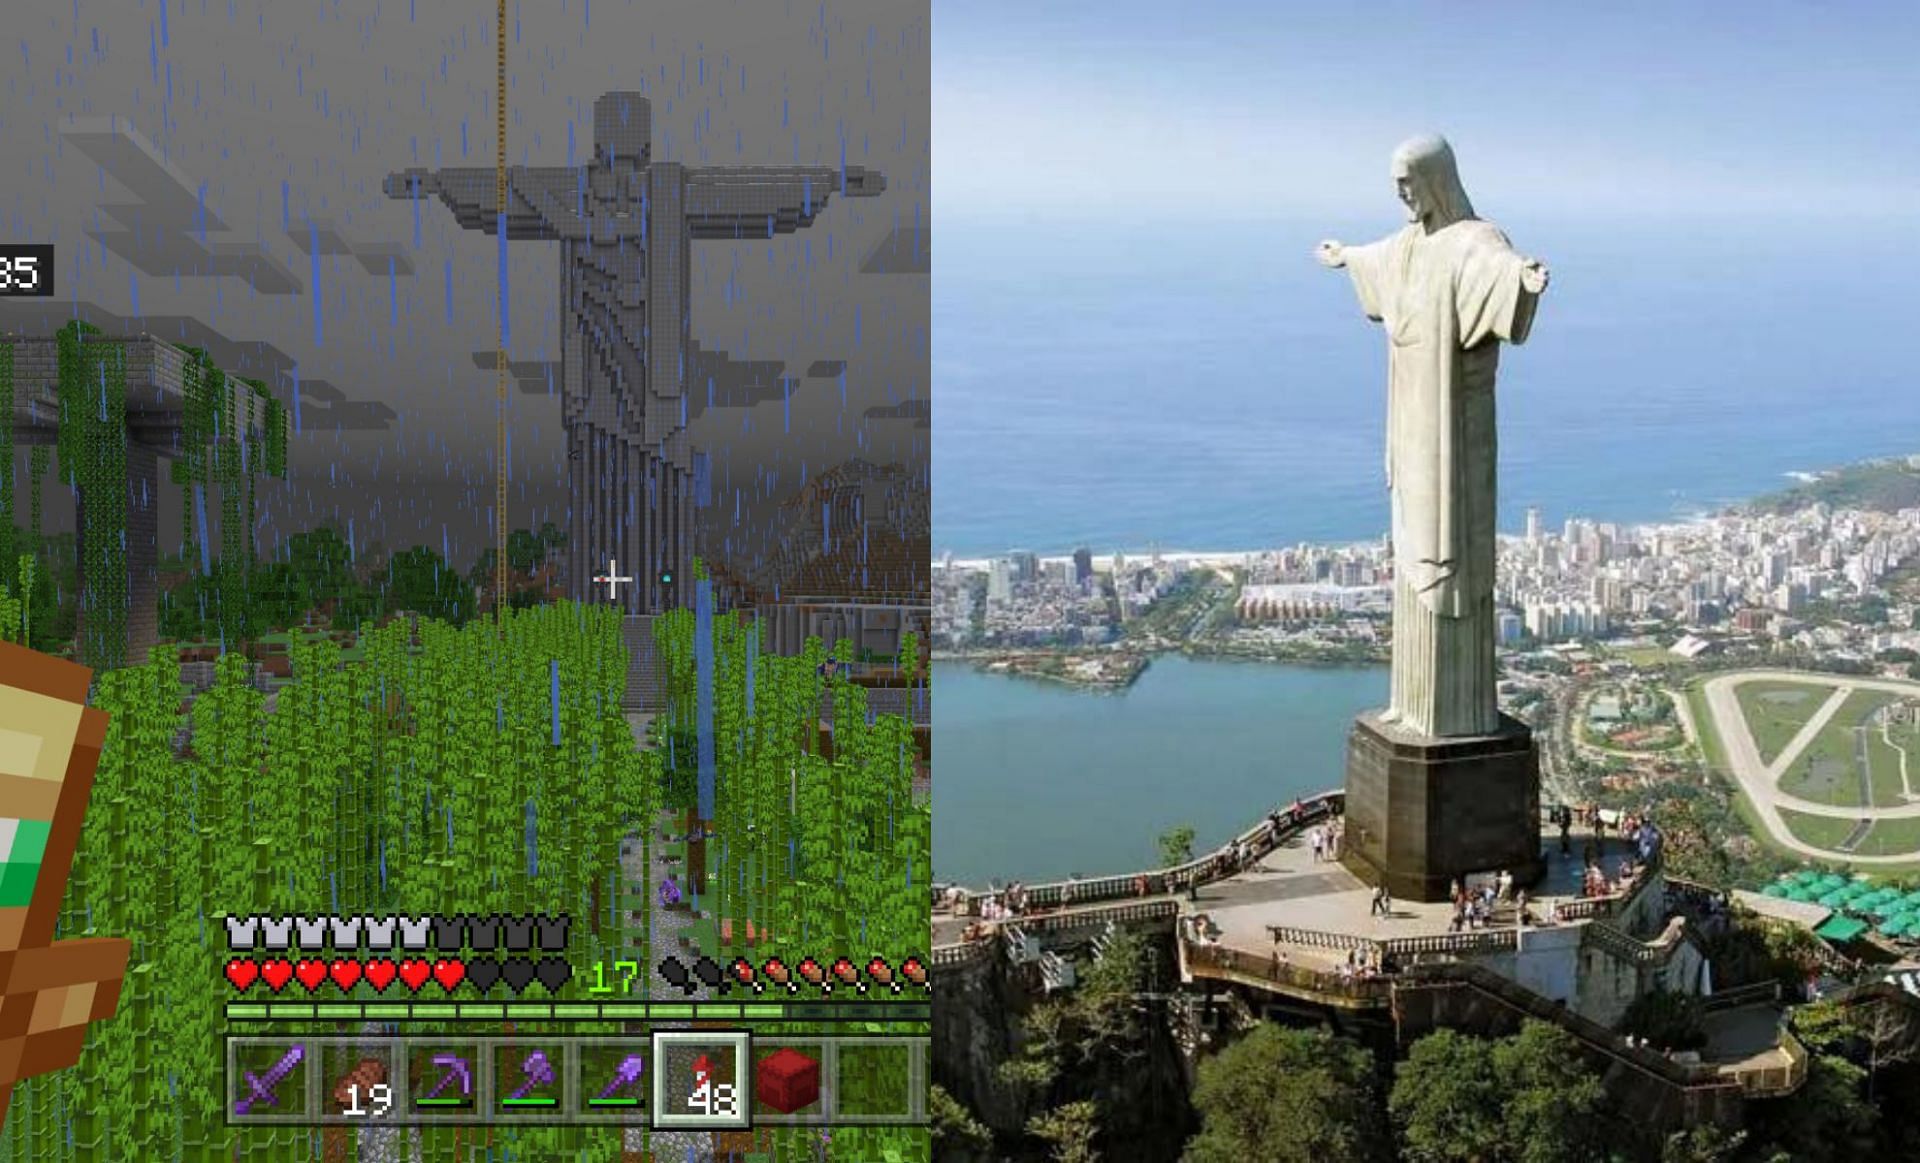 Christ the Redeemer (Images via u/waffel-and-a-pancake on Reddit and Encyclopedia Britannica)